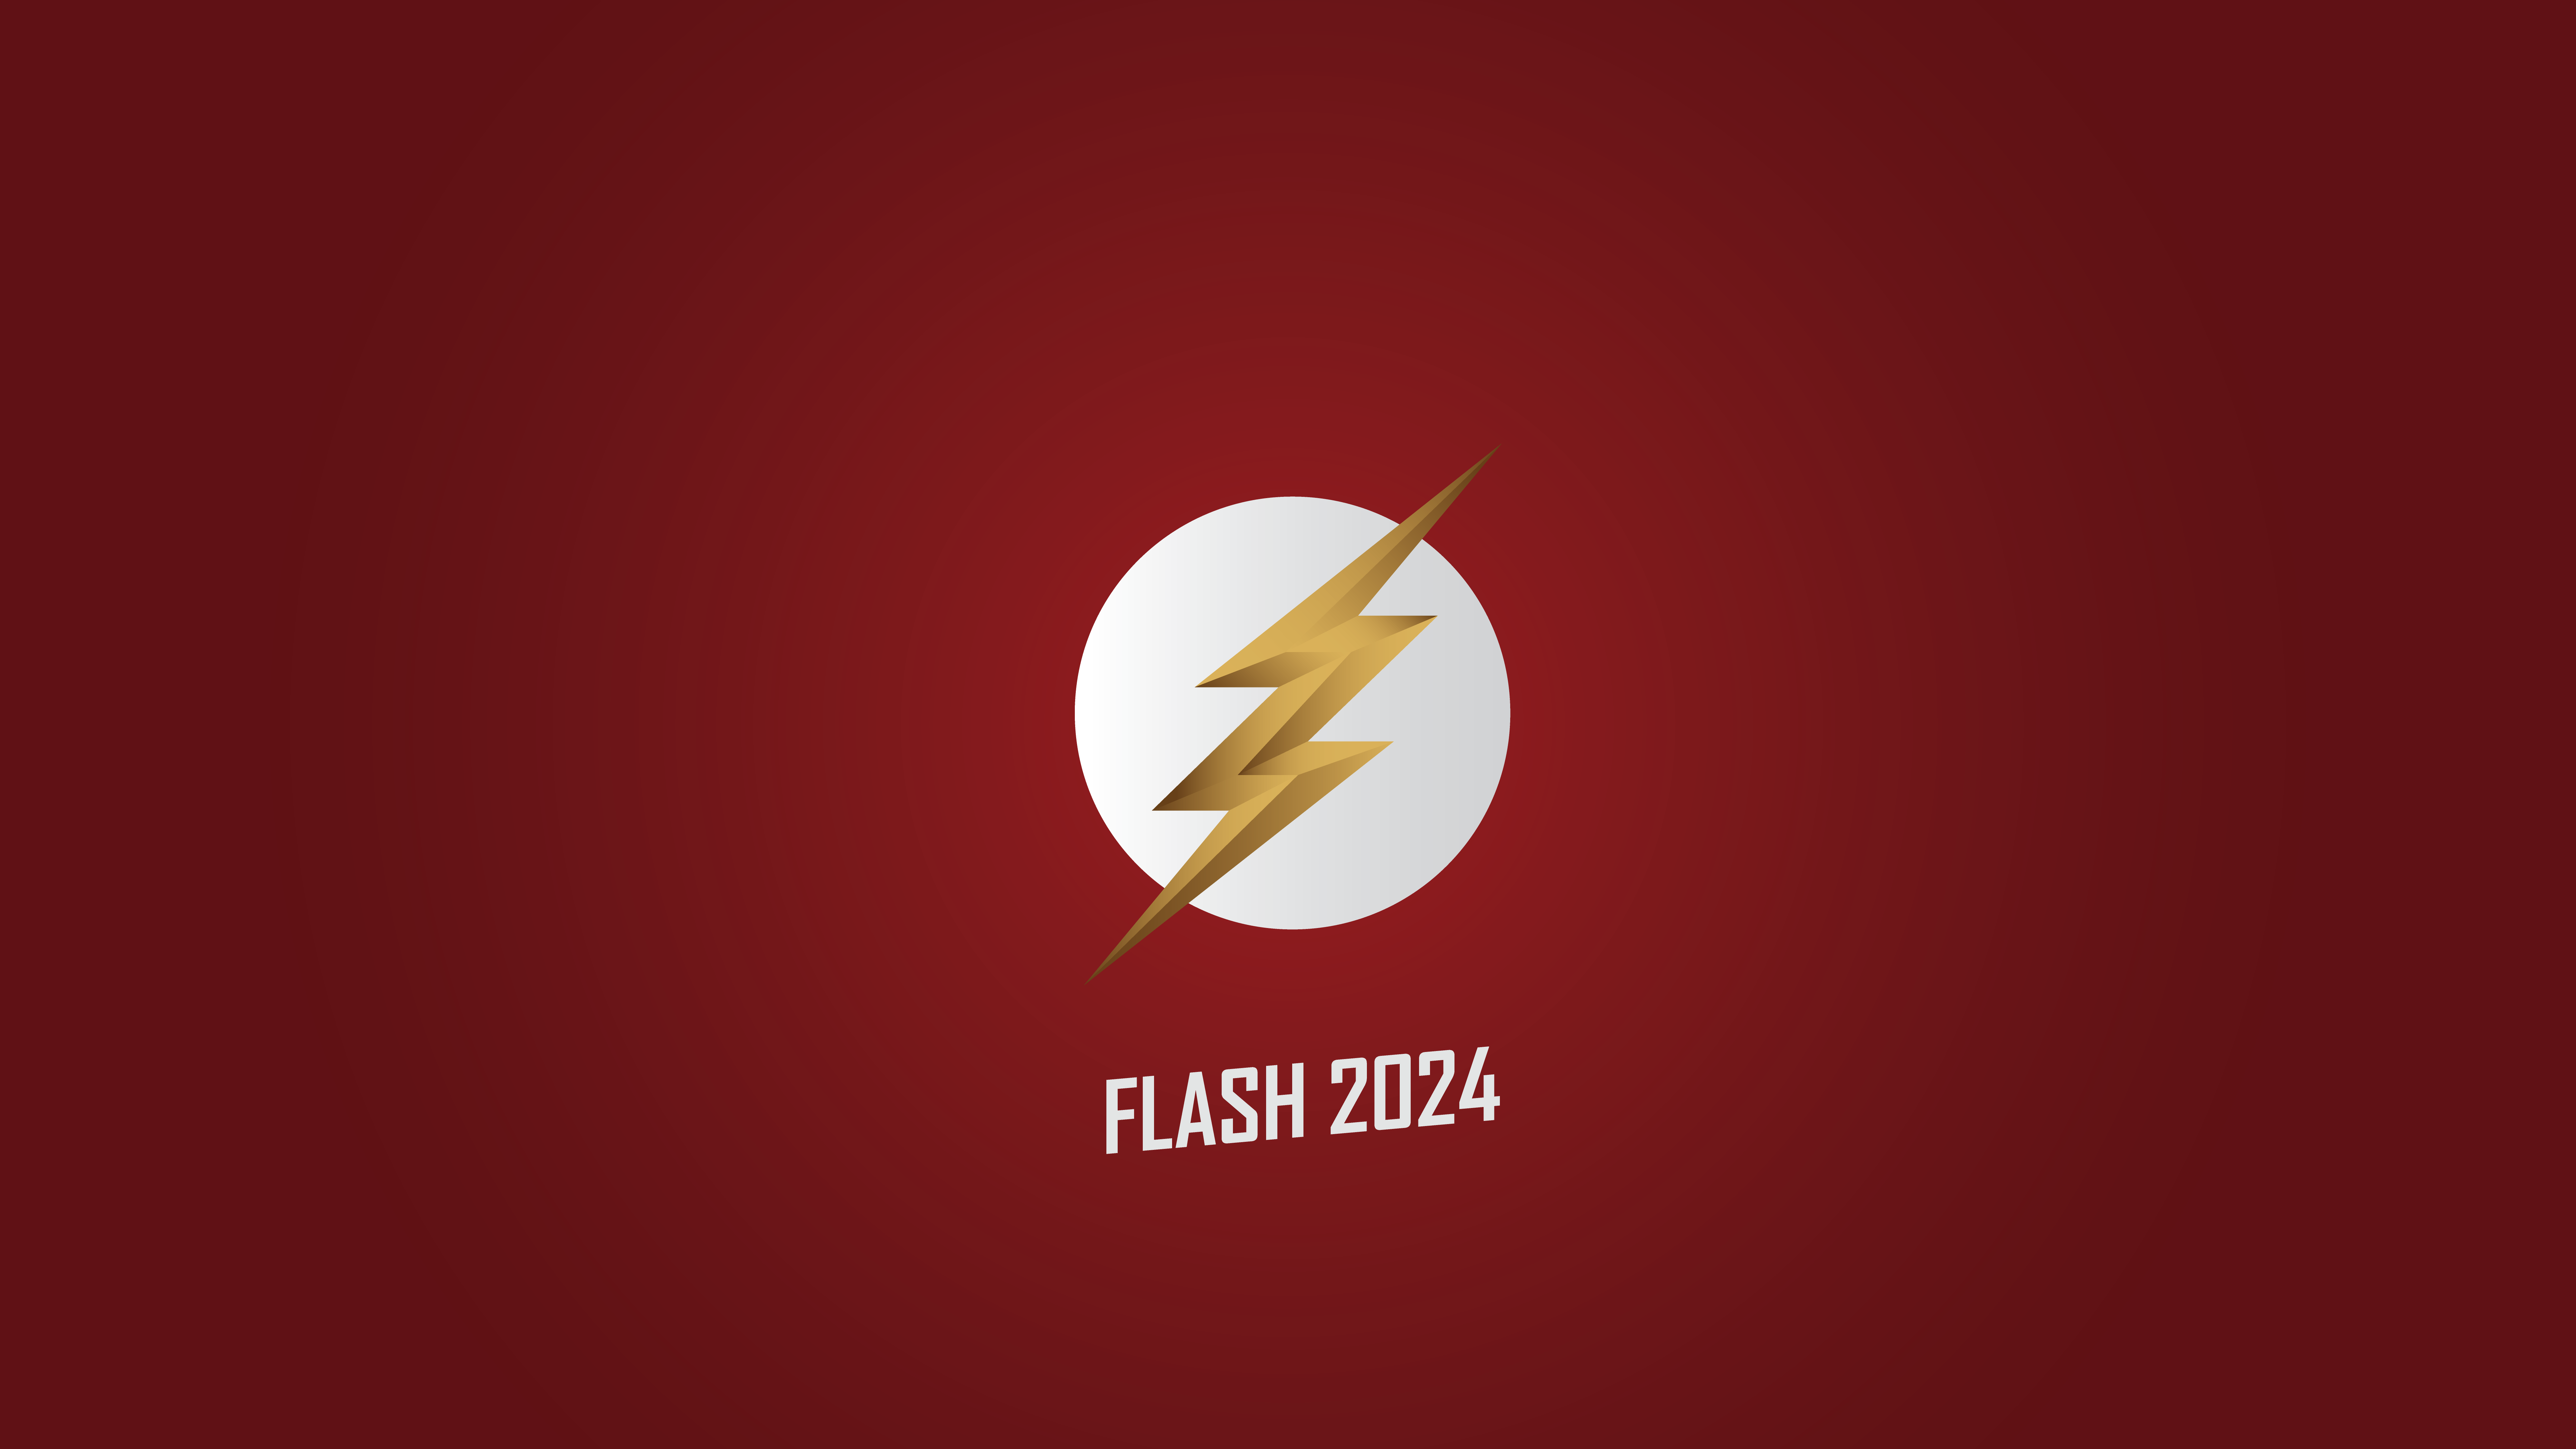 The Flash Cw Wallpaper By Godsnotdead88123 On